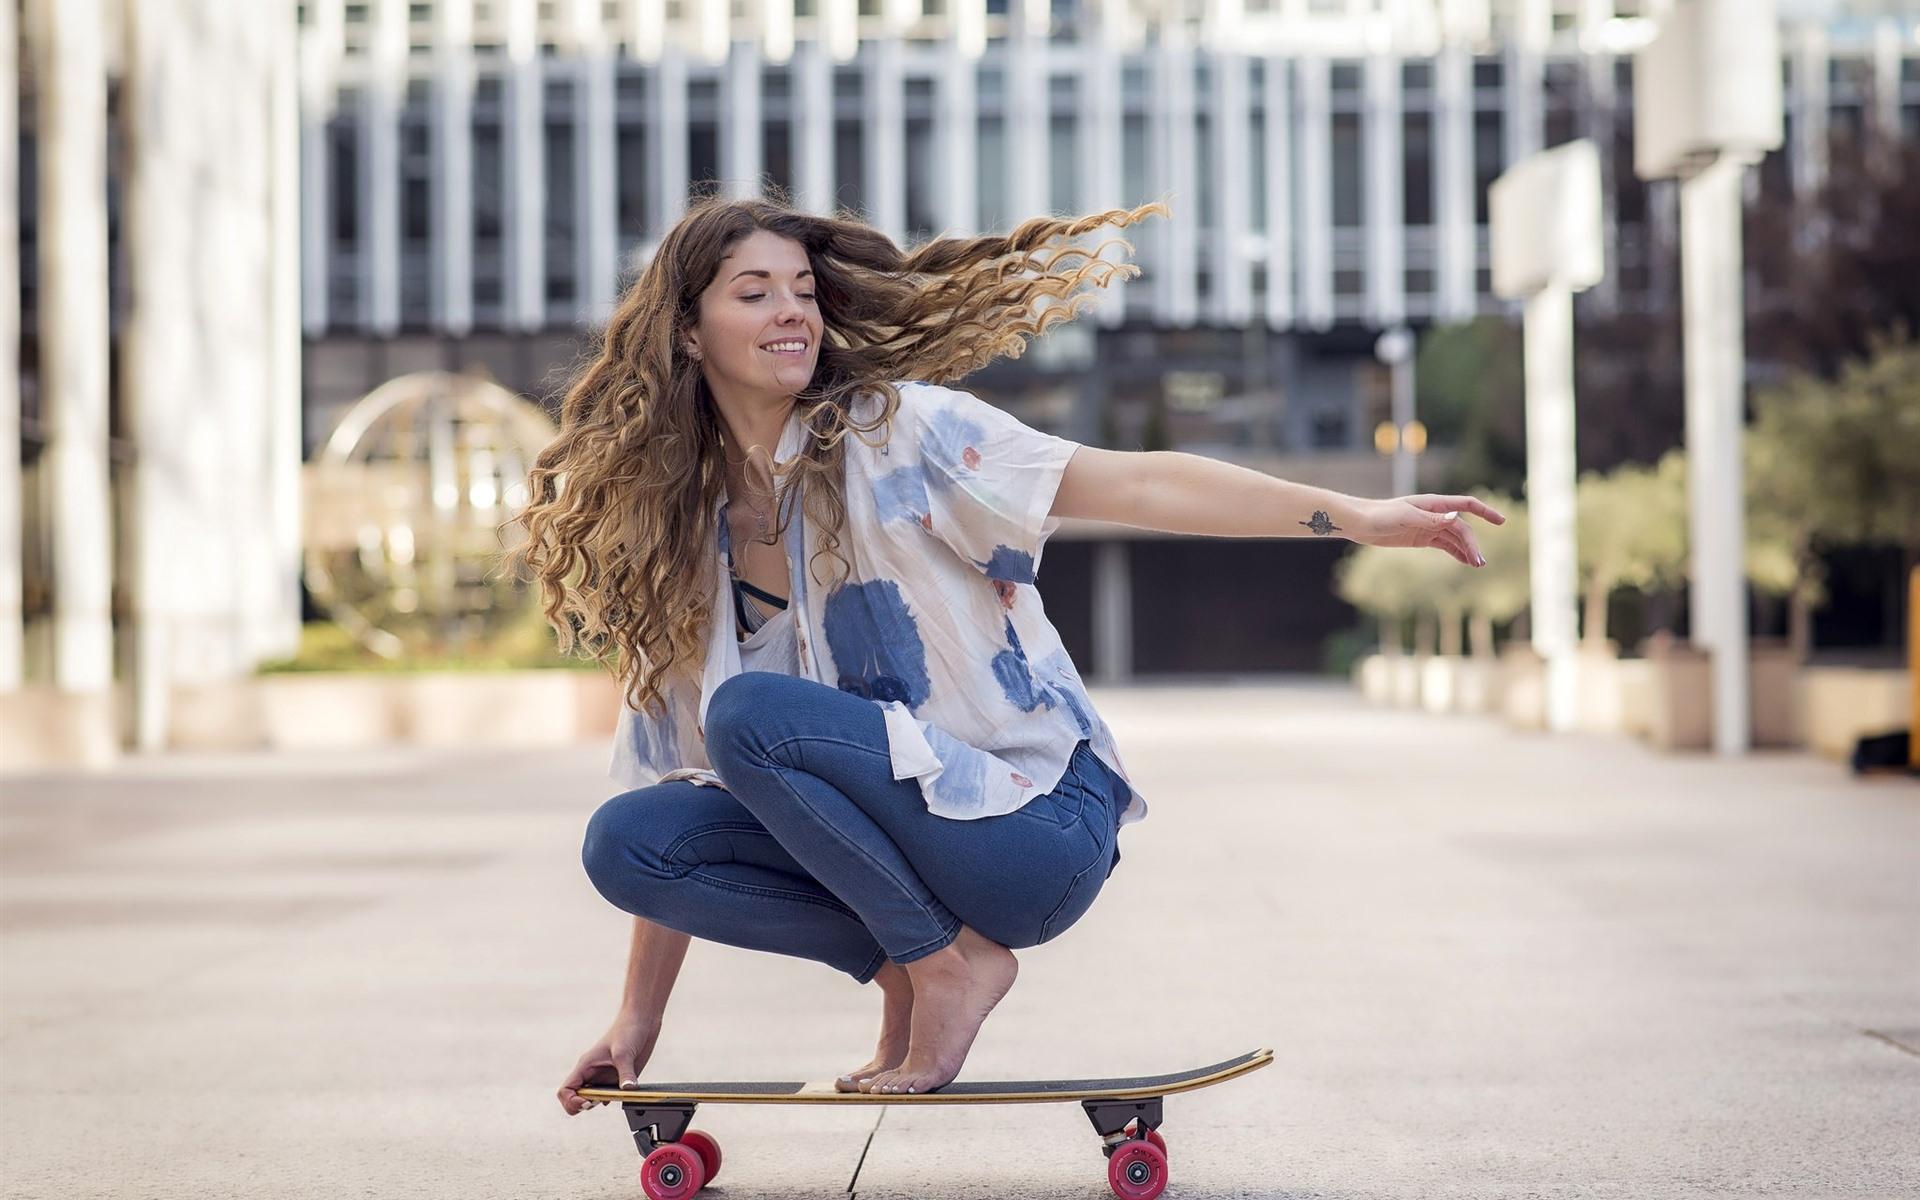 Wallpaper Girl, hairstyle, skate, street 1920x1200 HD Picture, Image